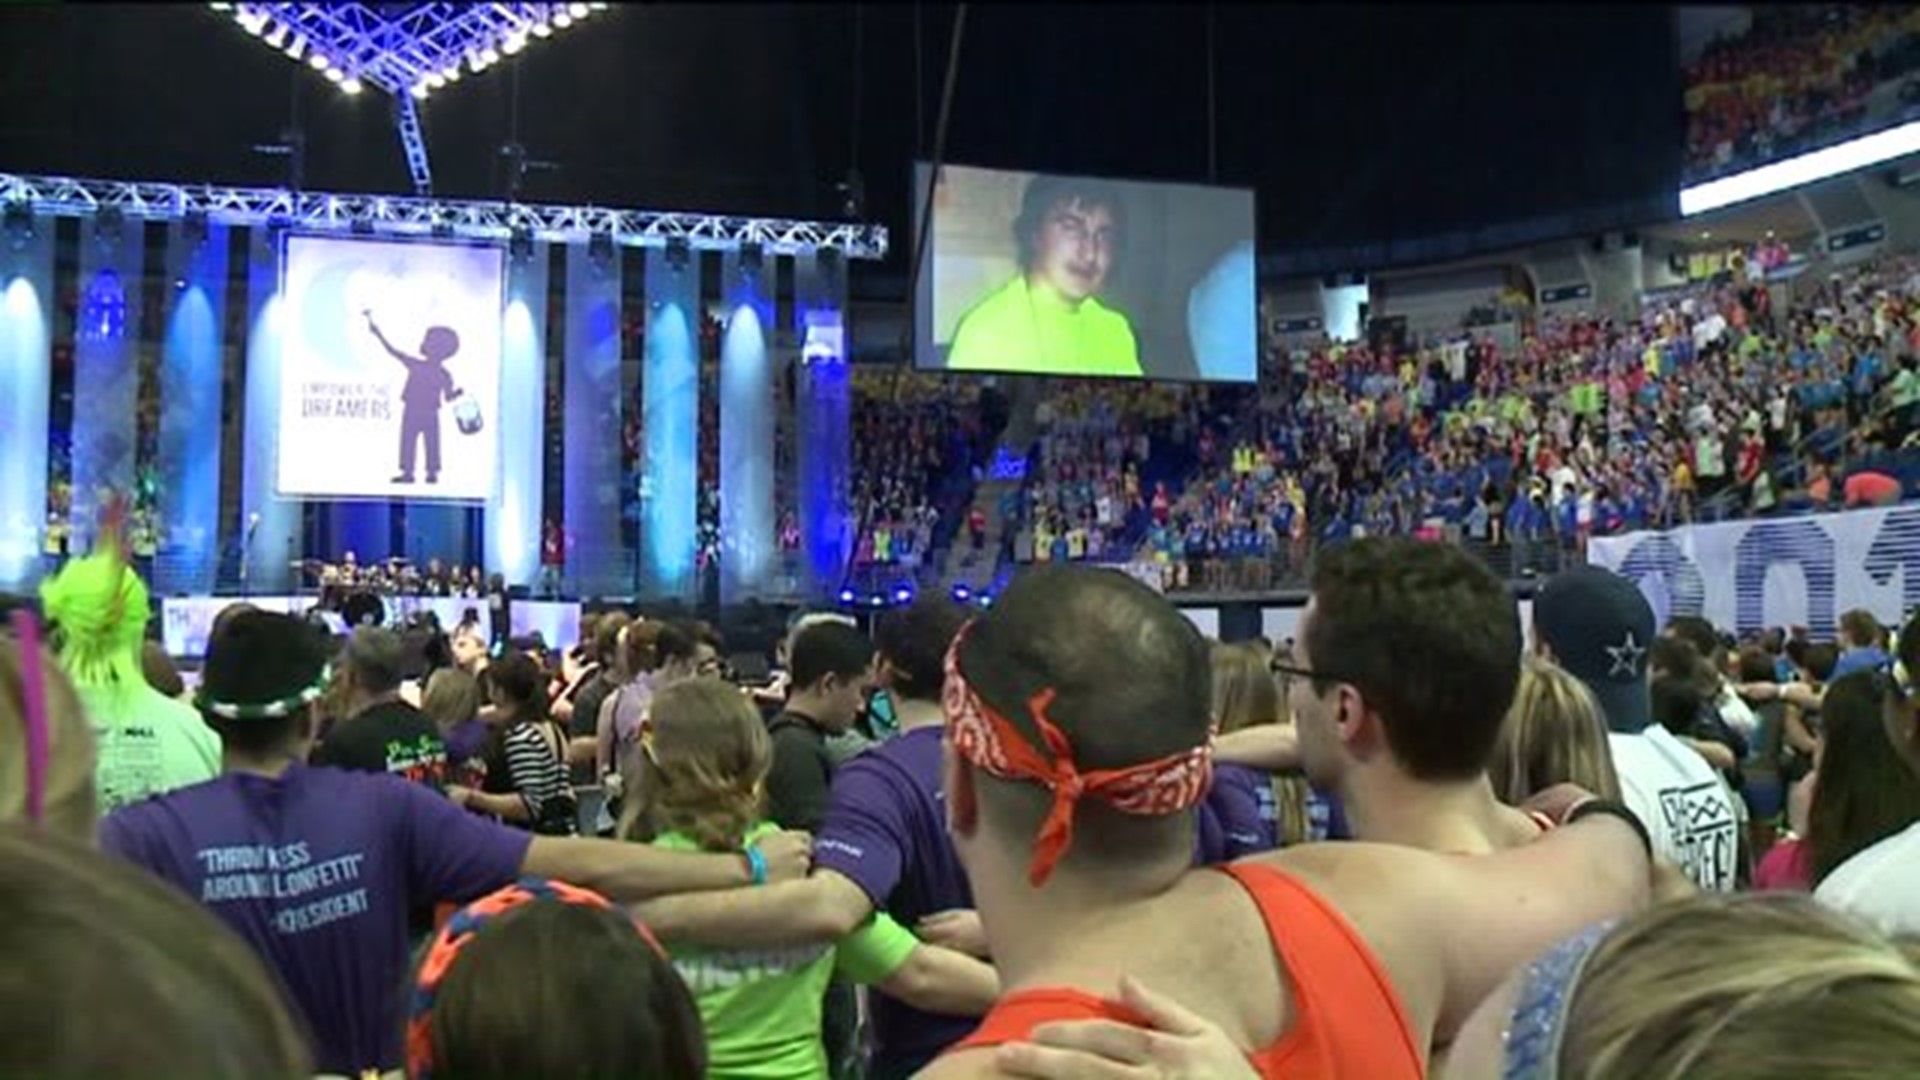 Locals Benefit From THON Fundraiser